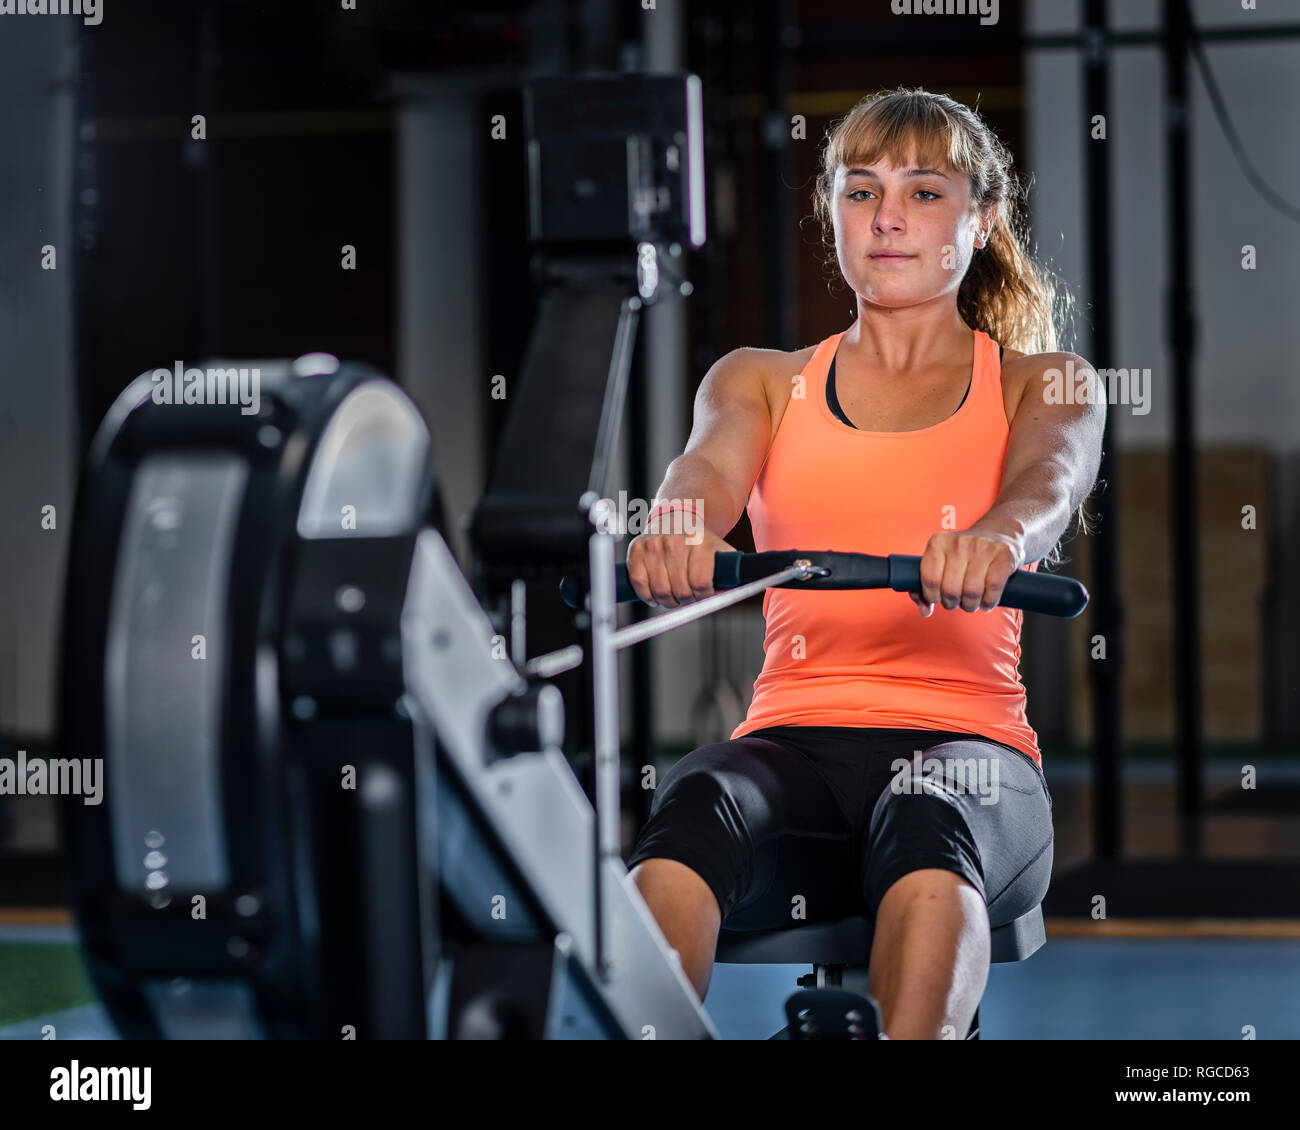 Athletic young woman exercising with rowing machine at gym Stock Photo